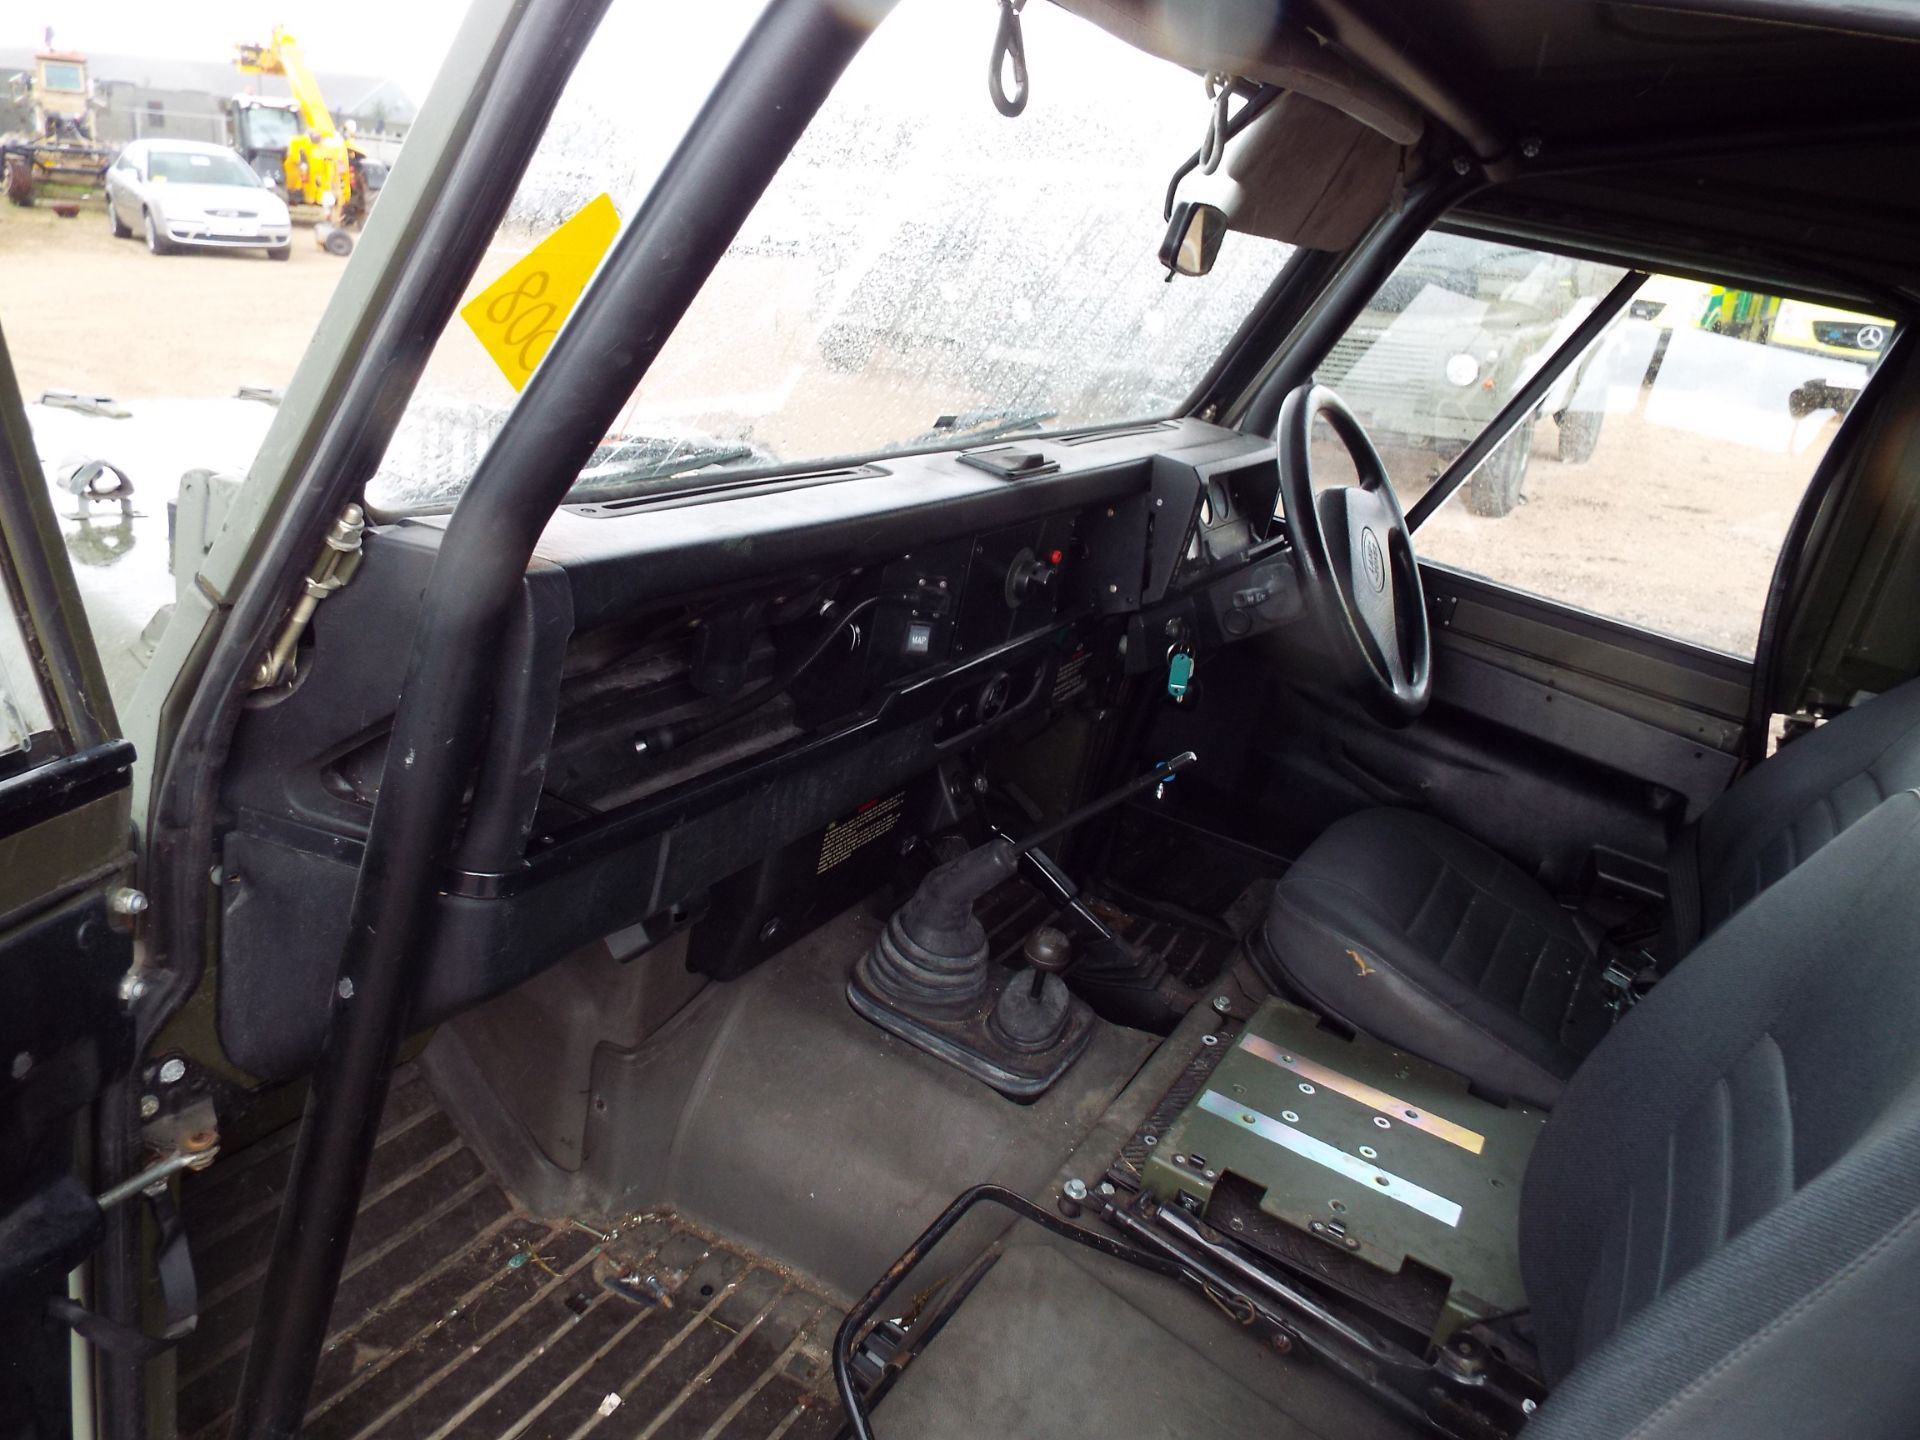 Military Specification Land Rover Wolf 110 Hard Top - Image 12 of 25